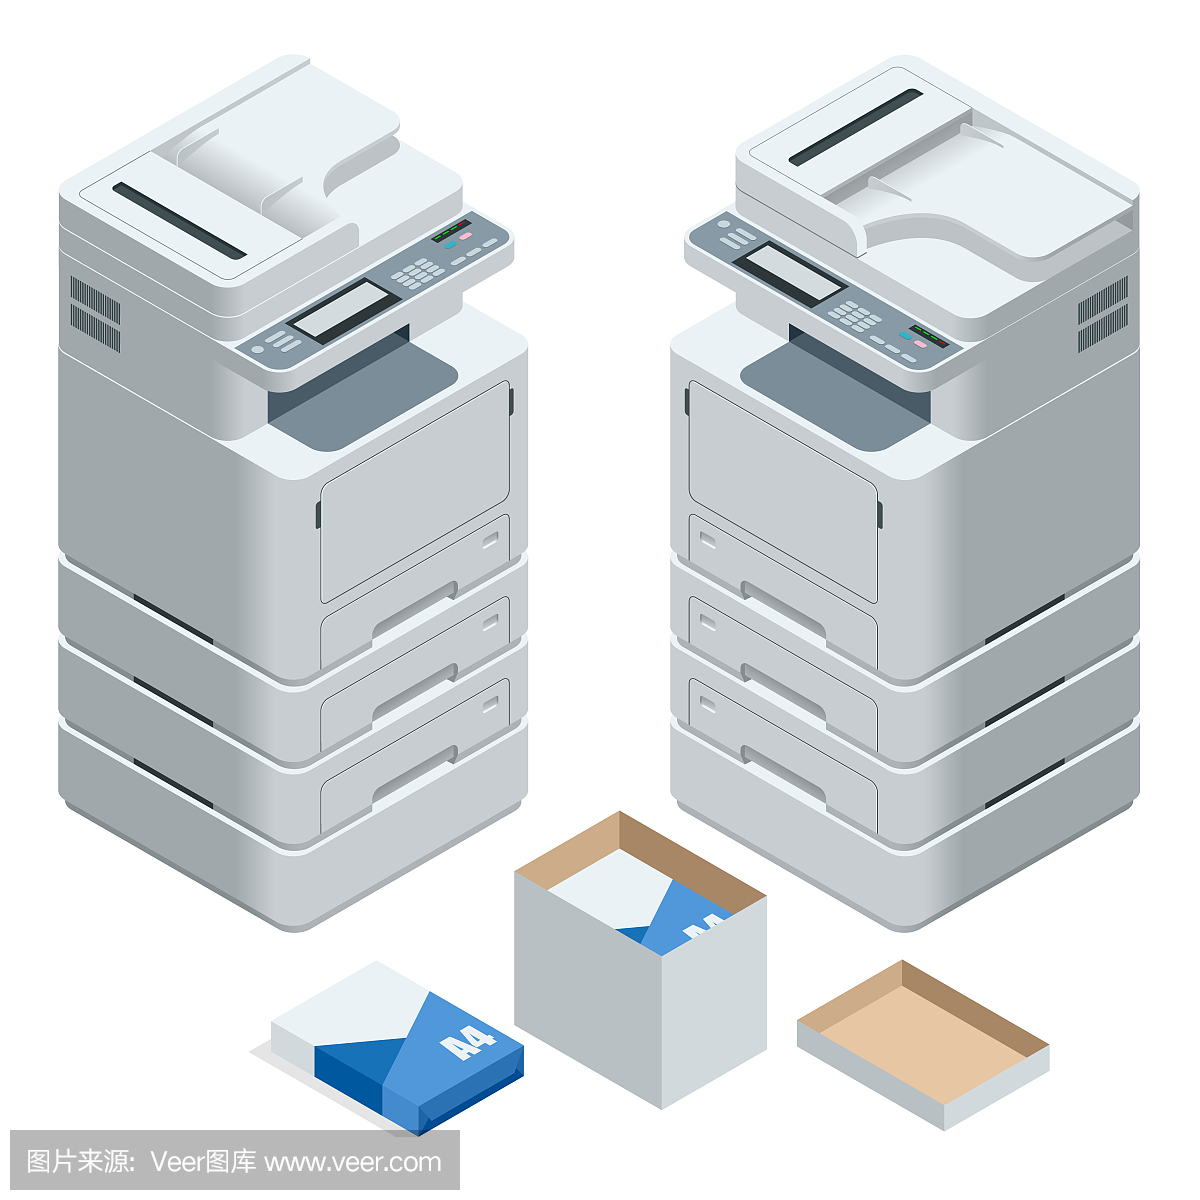 Isometric multifunction office printer. Office professional multi-function printer scanner isolated flat vector illustration